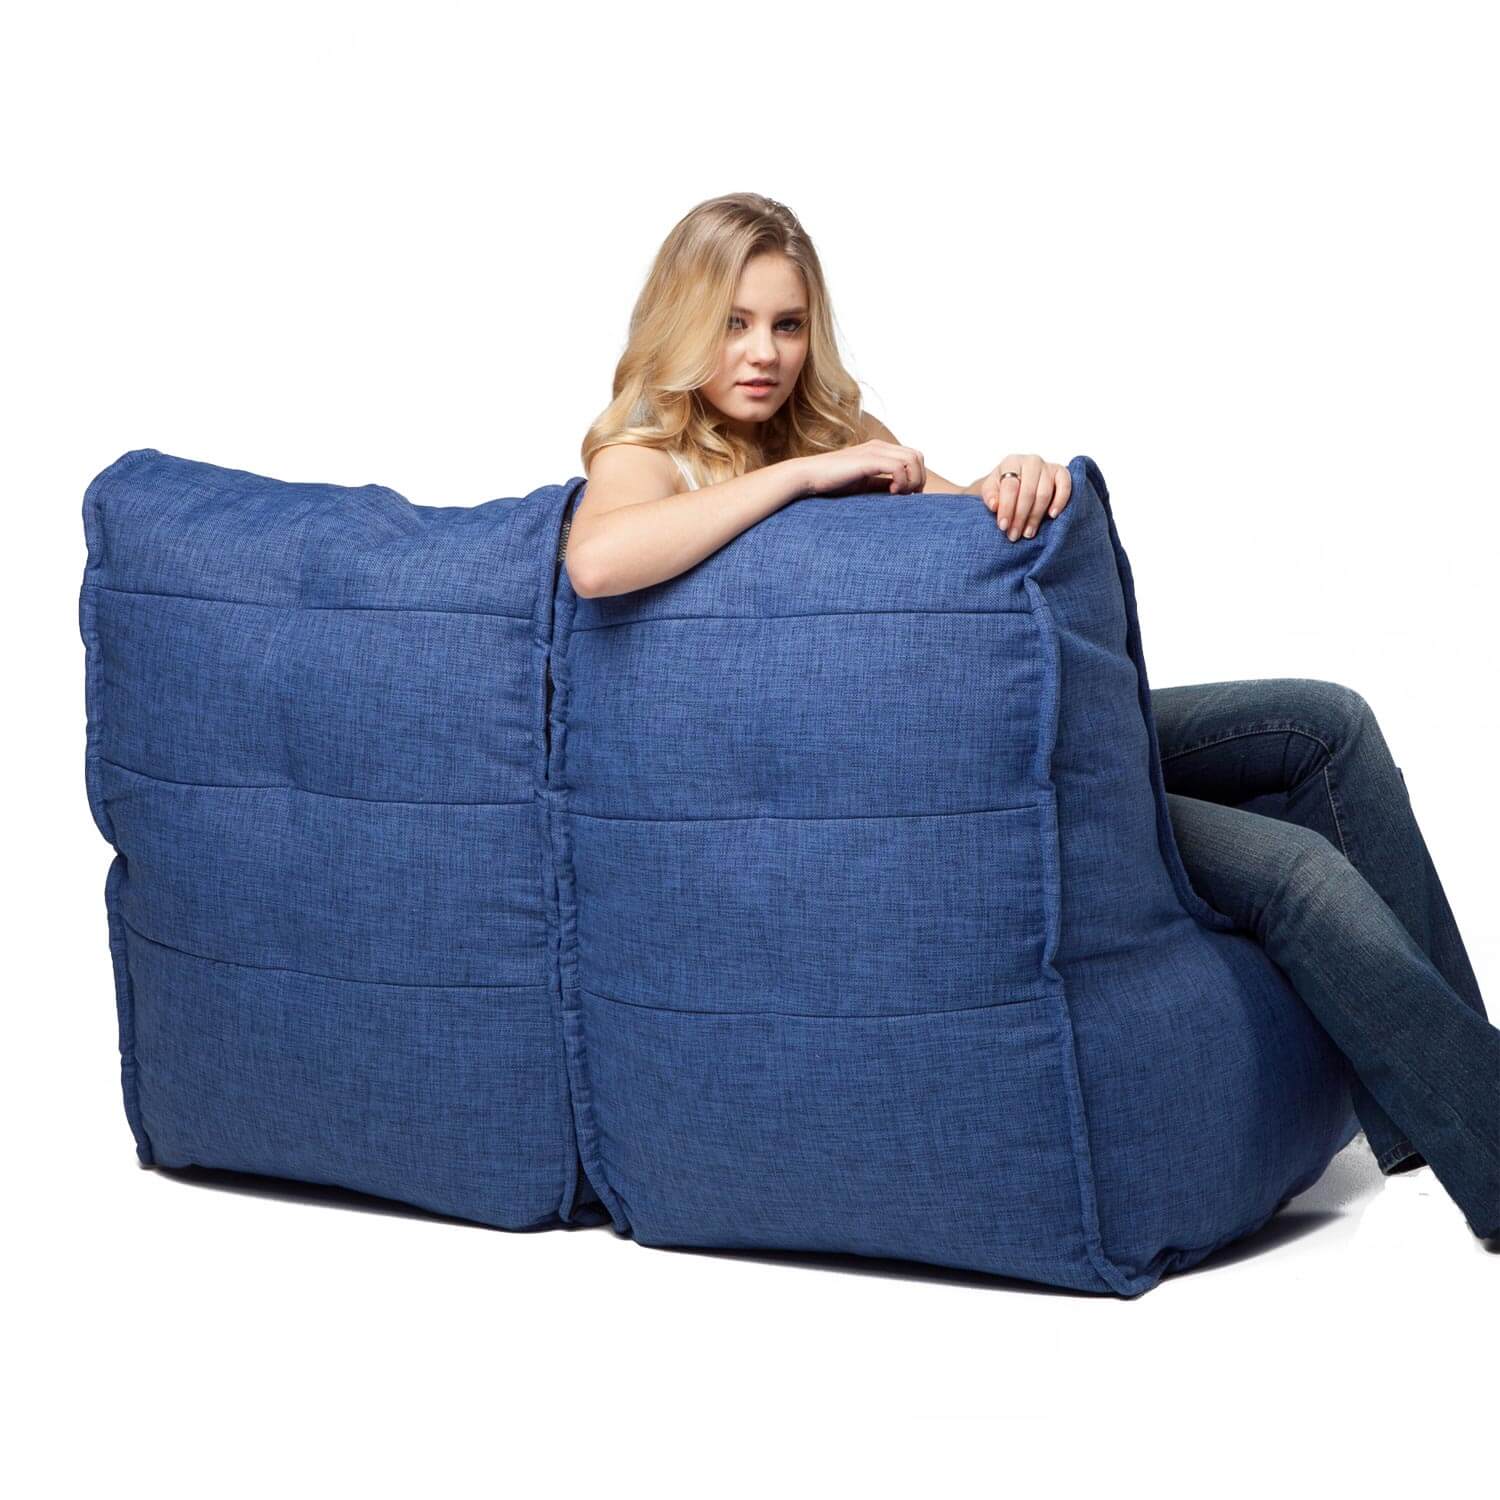 https://www.ambientlounge.co.nz/images/detailed/4/blue-jazz-twin-couch-hero.jpg